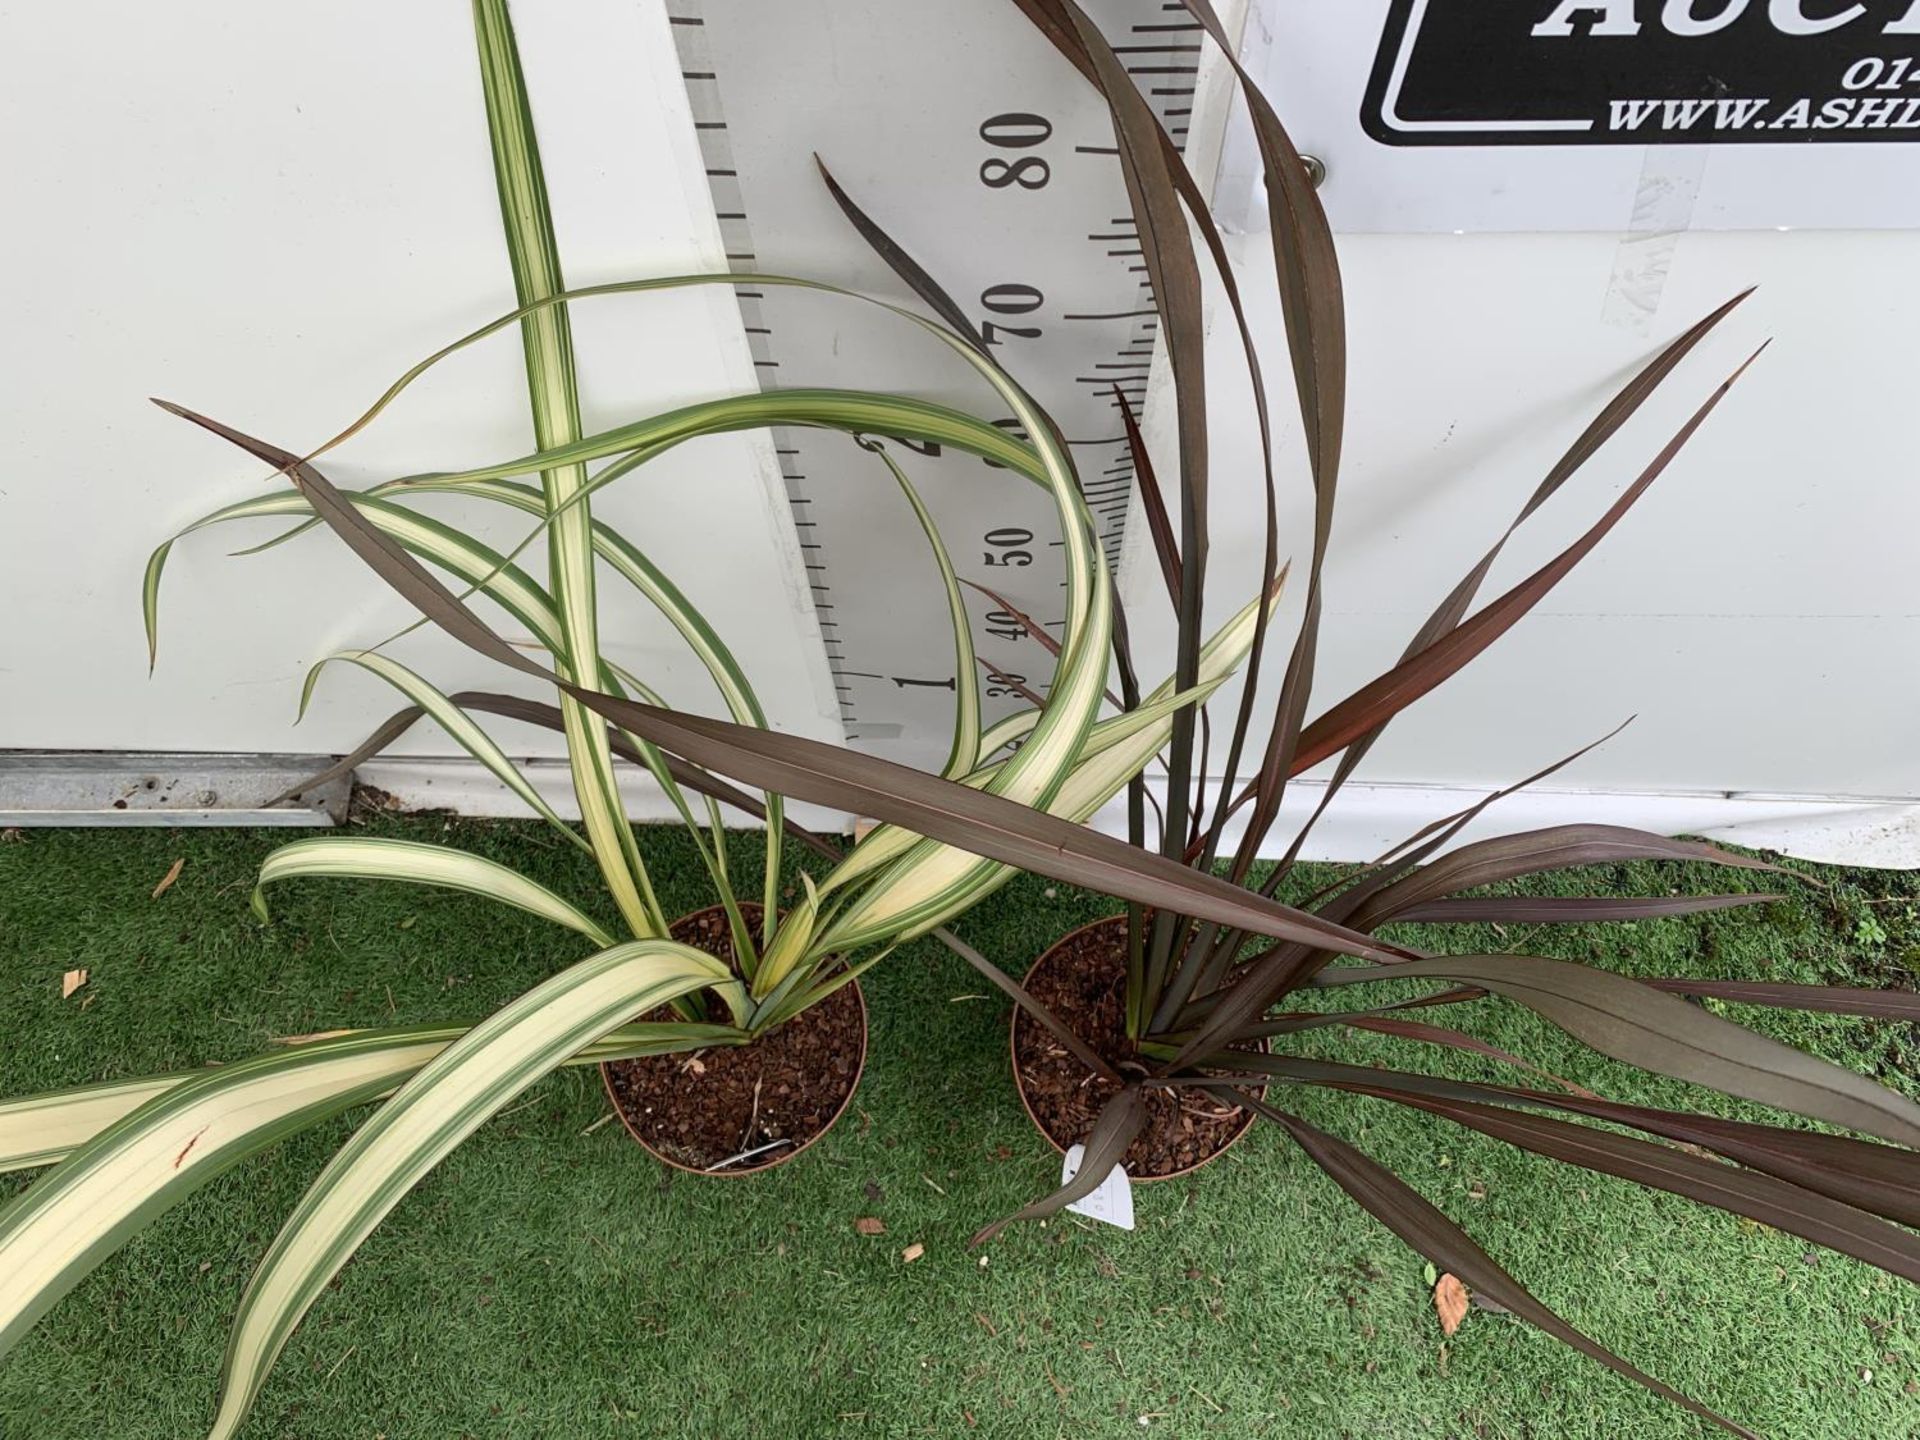 TWO PHORMIUM TENAX 'CREAM DELIGHT' AND 'PLATTS BLACK' IN 3LTR POTS APPROX 80CM IN HEIGHT PLUS VAT TO - Image 5 of 6